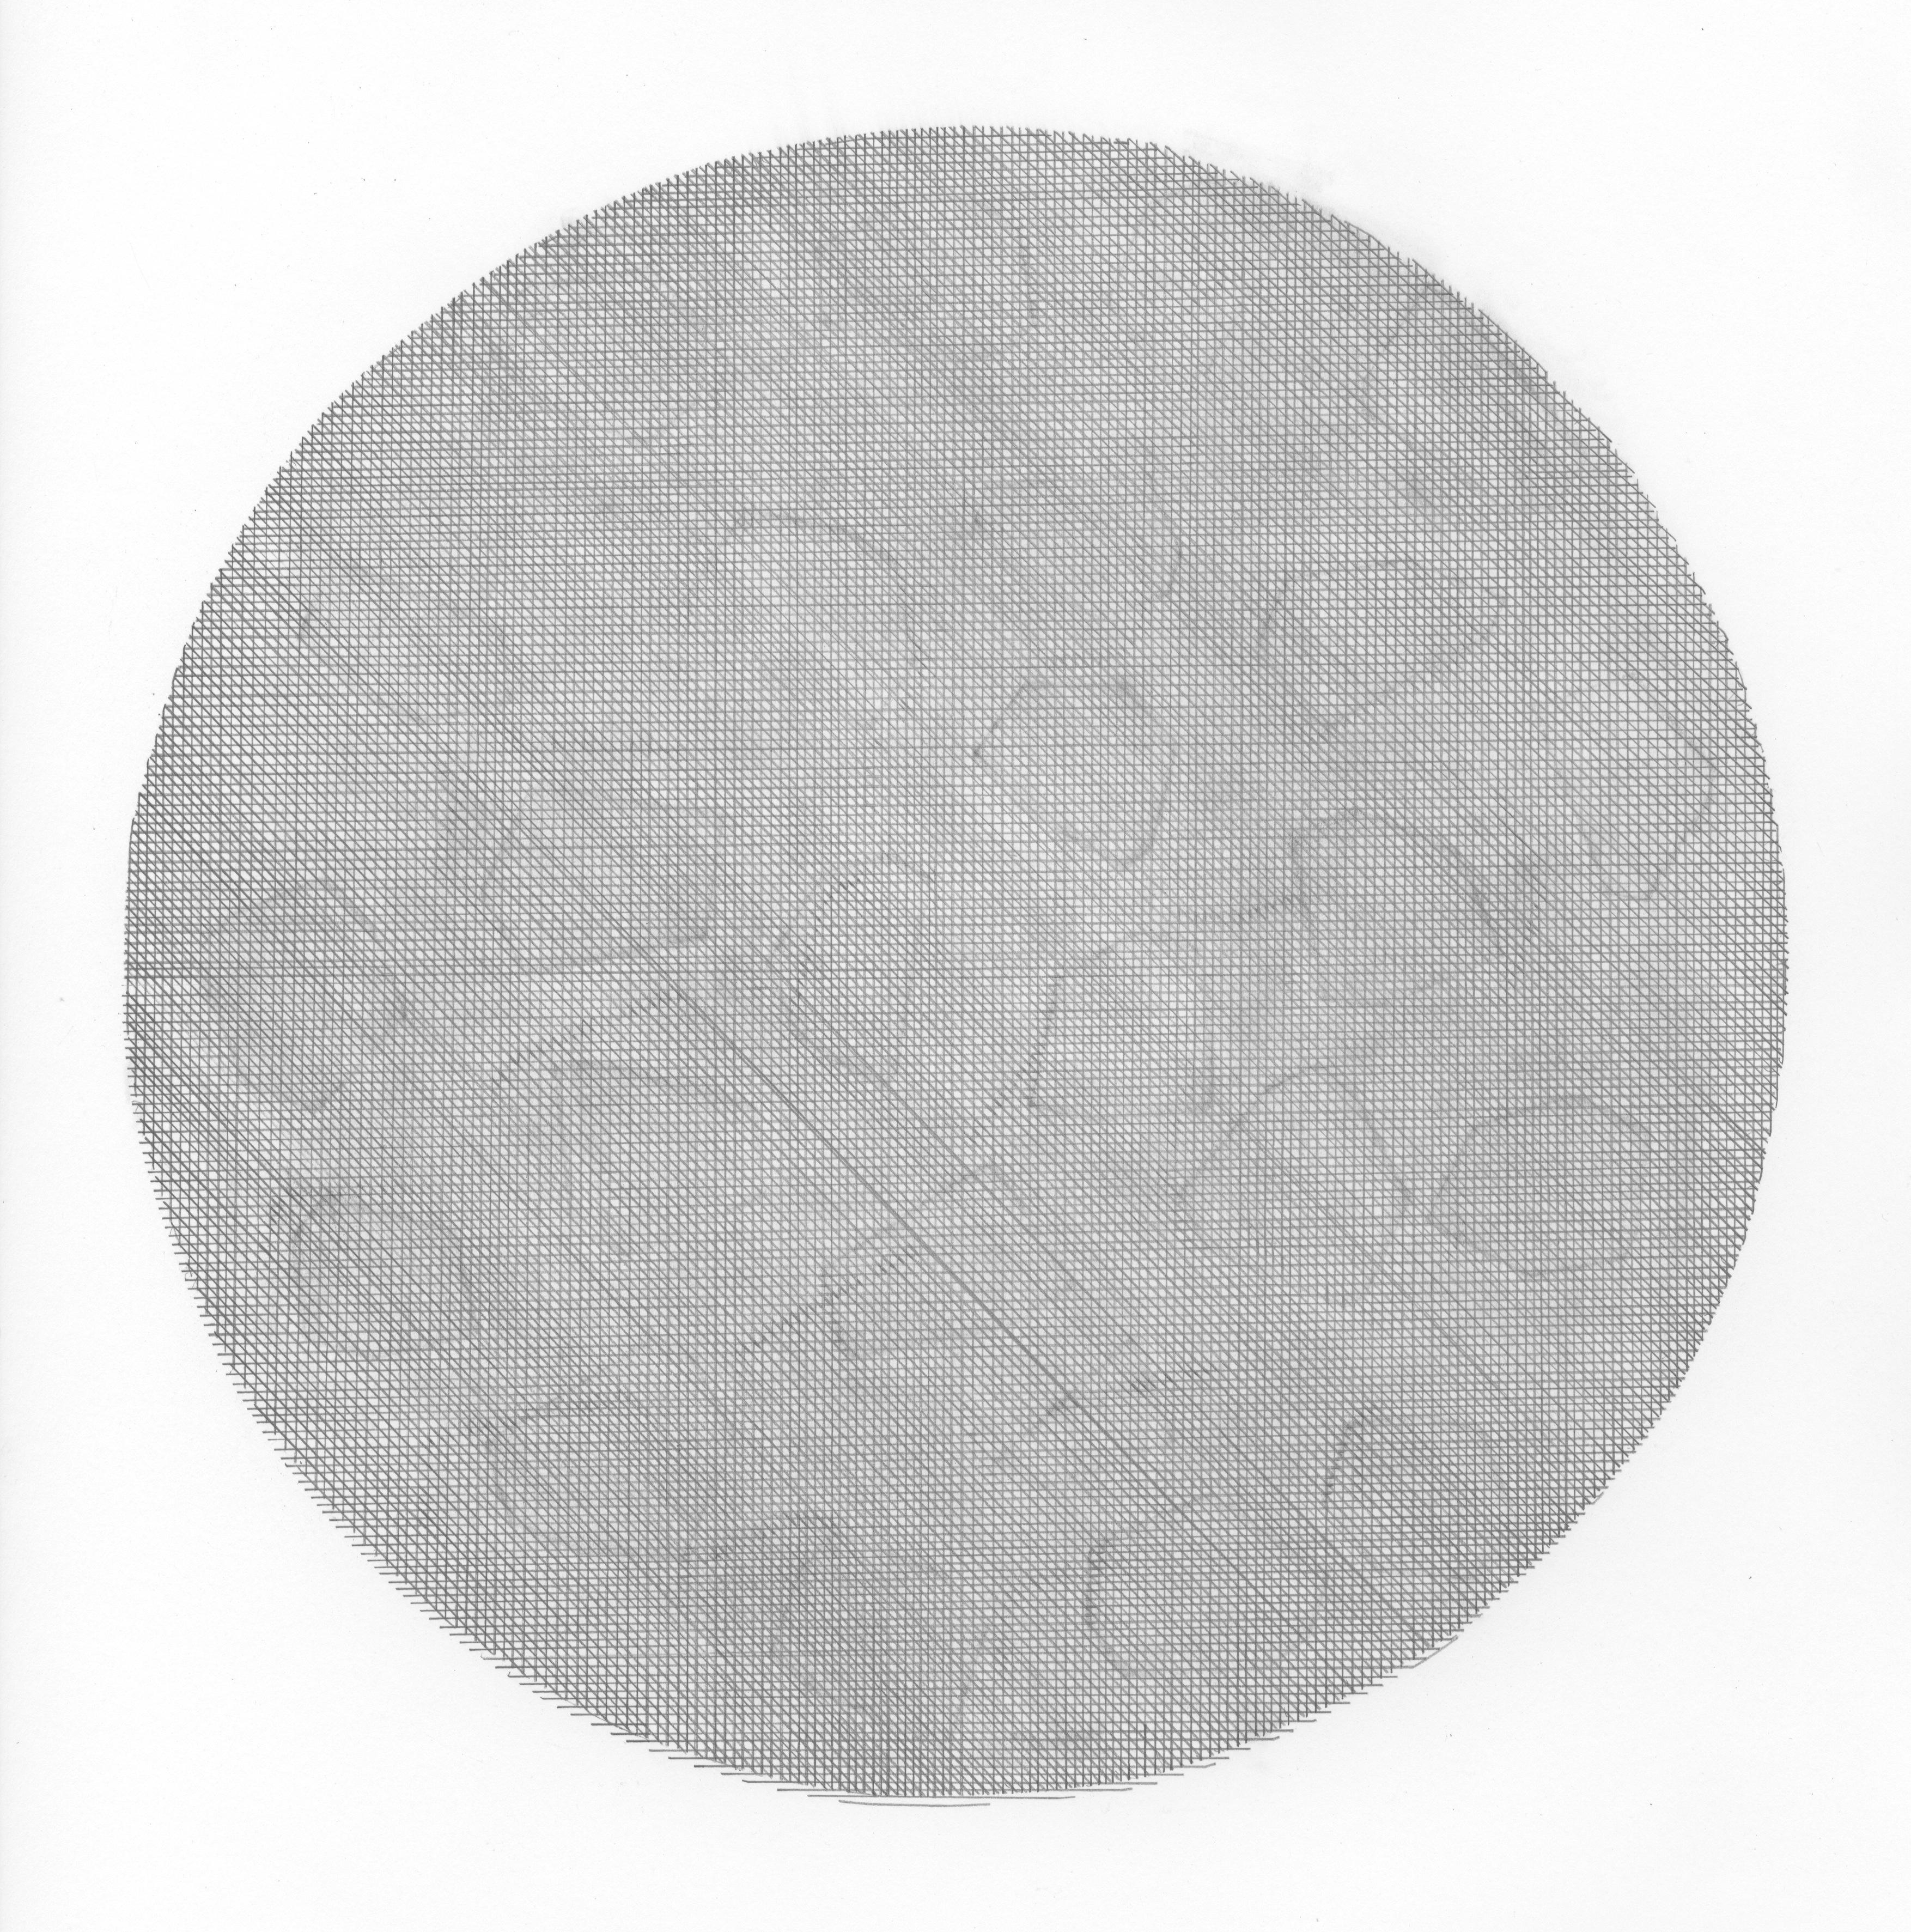 Drawing #122s from a portfolio of 33 Drawings, 2016-18, Graphite on paper (unframed), 13 4/5 × 13 4/5 in; 35 × 35 cm by Alan Franklin

This original drawing on paper is from a portfolio of 33 drawings by the sculptor and artist, Alan Franklin. Alan